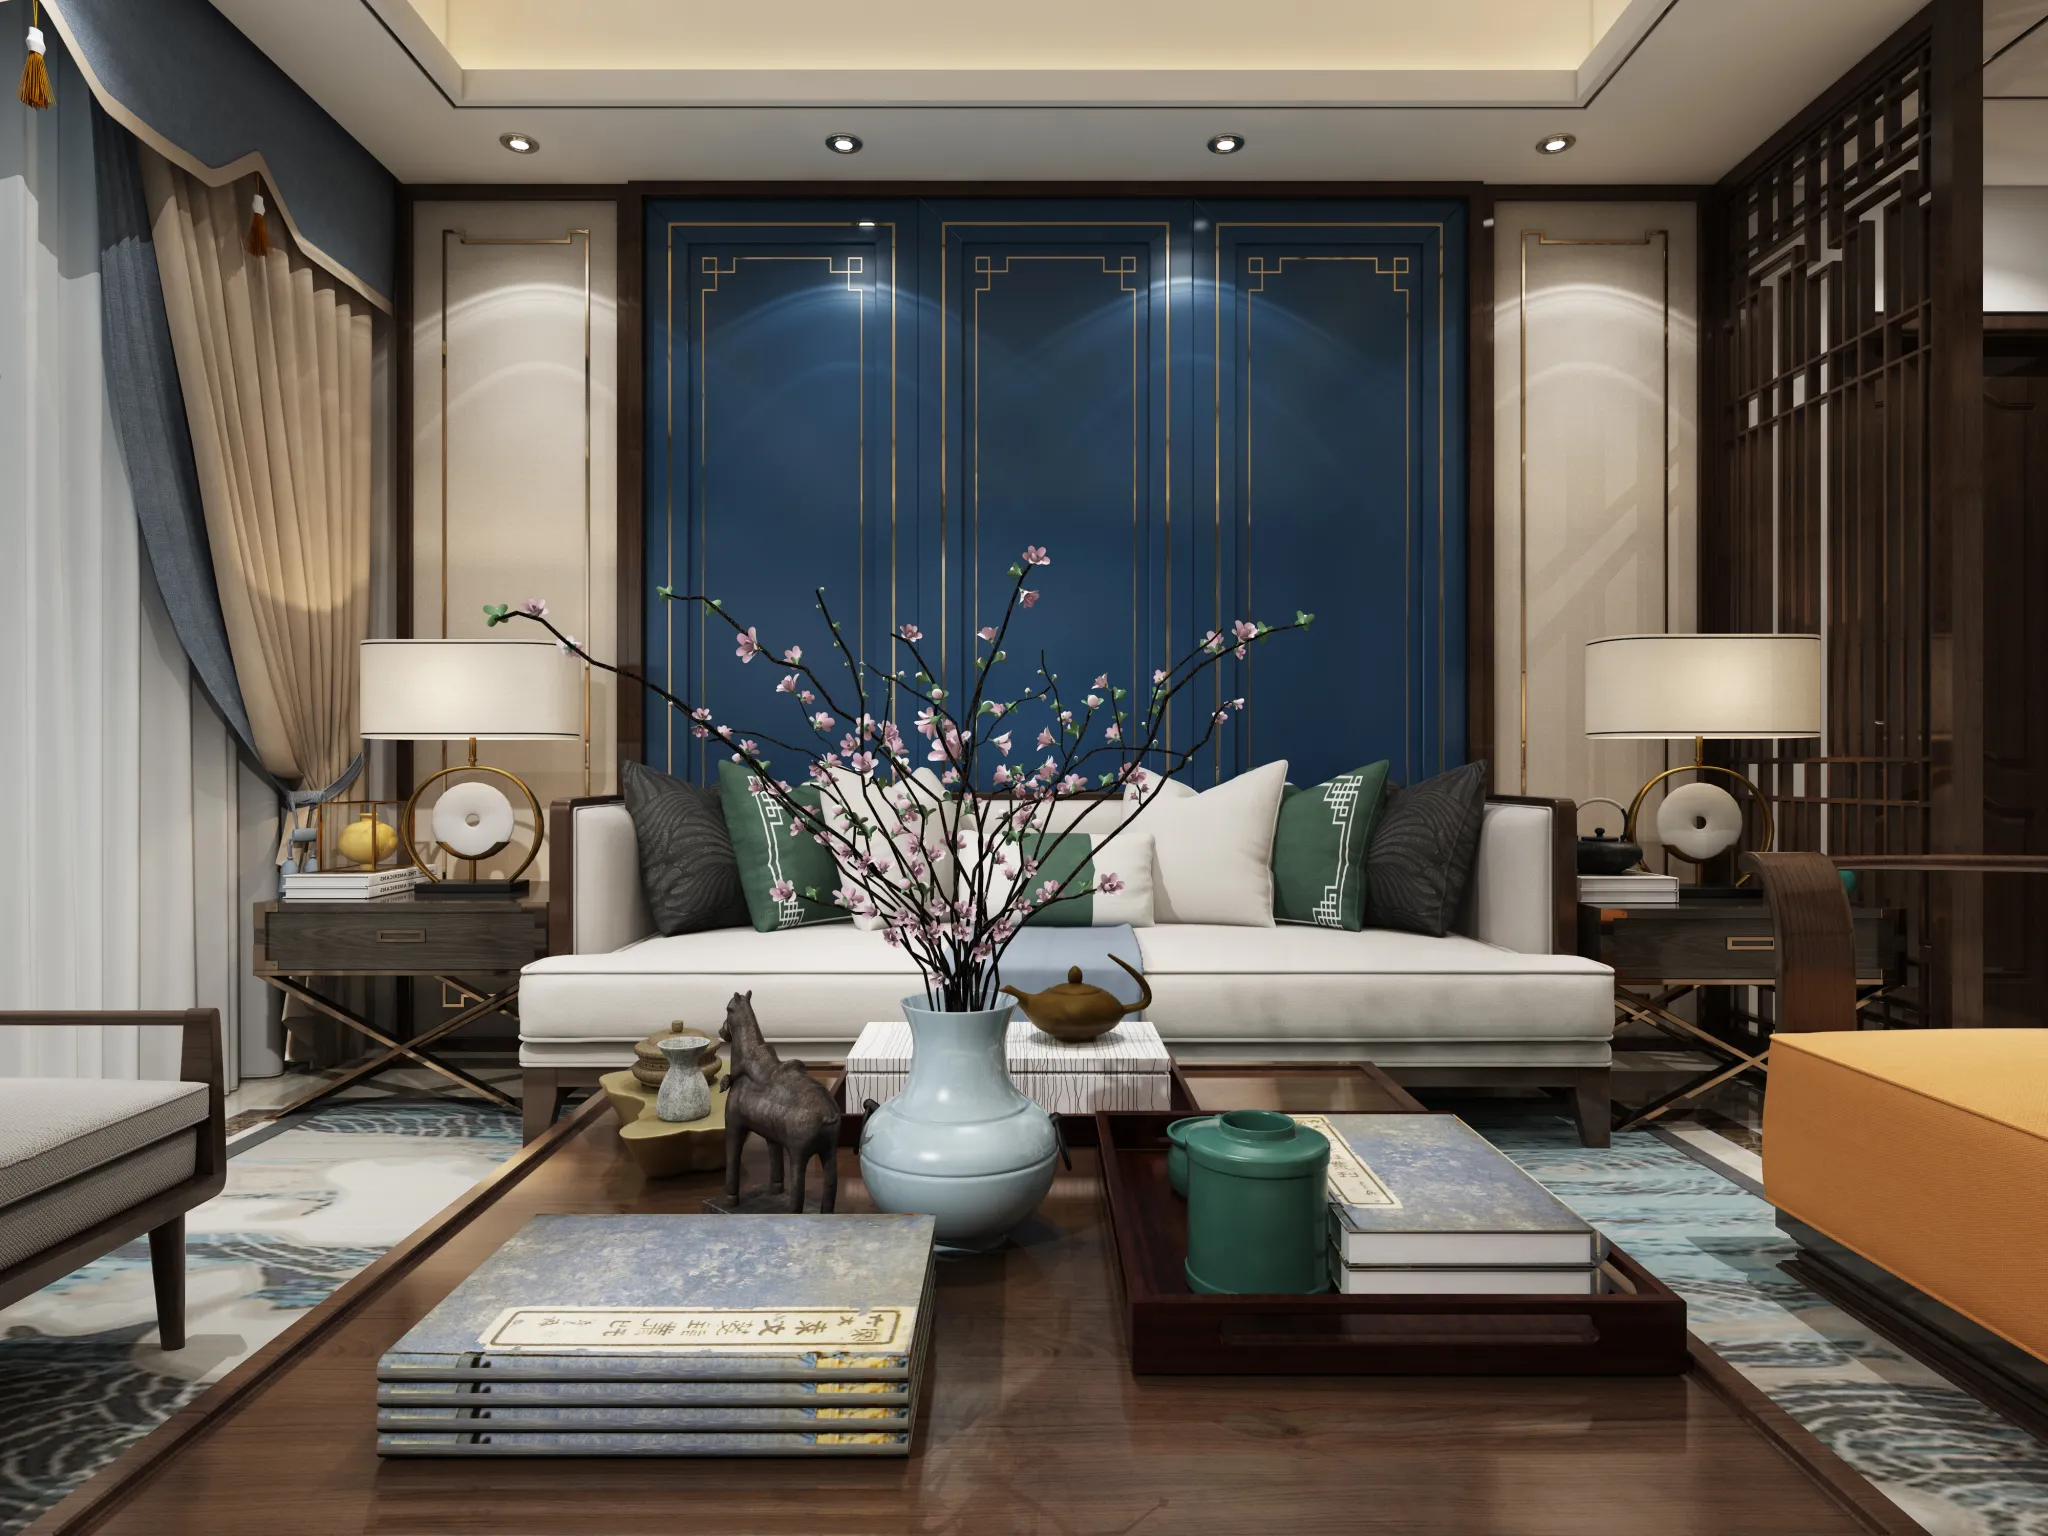 DESMOD INTERIOR 2021 (VRAY) – 4. LIVING ROOM – CHINESE – 065